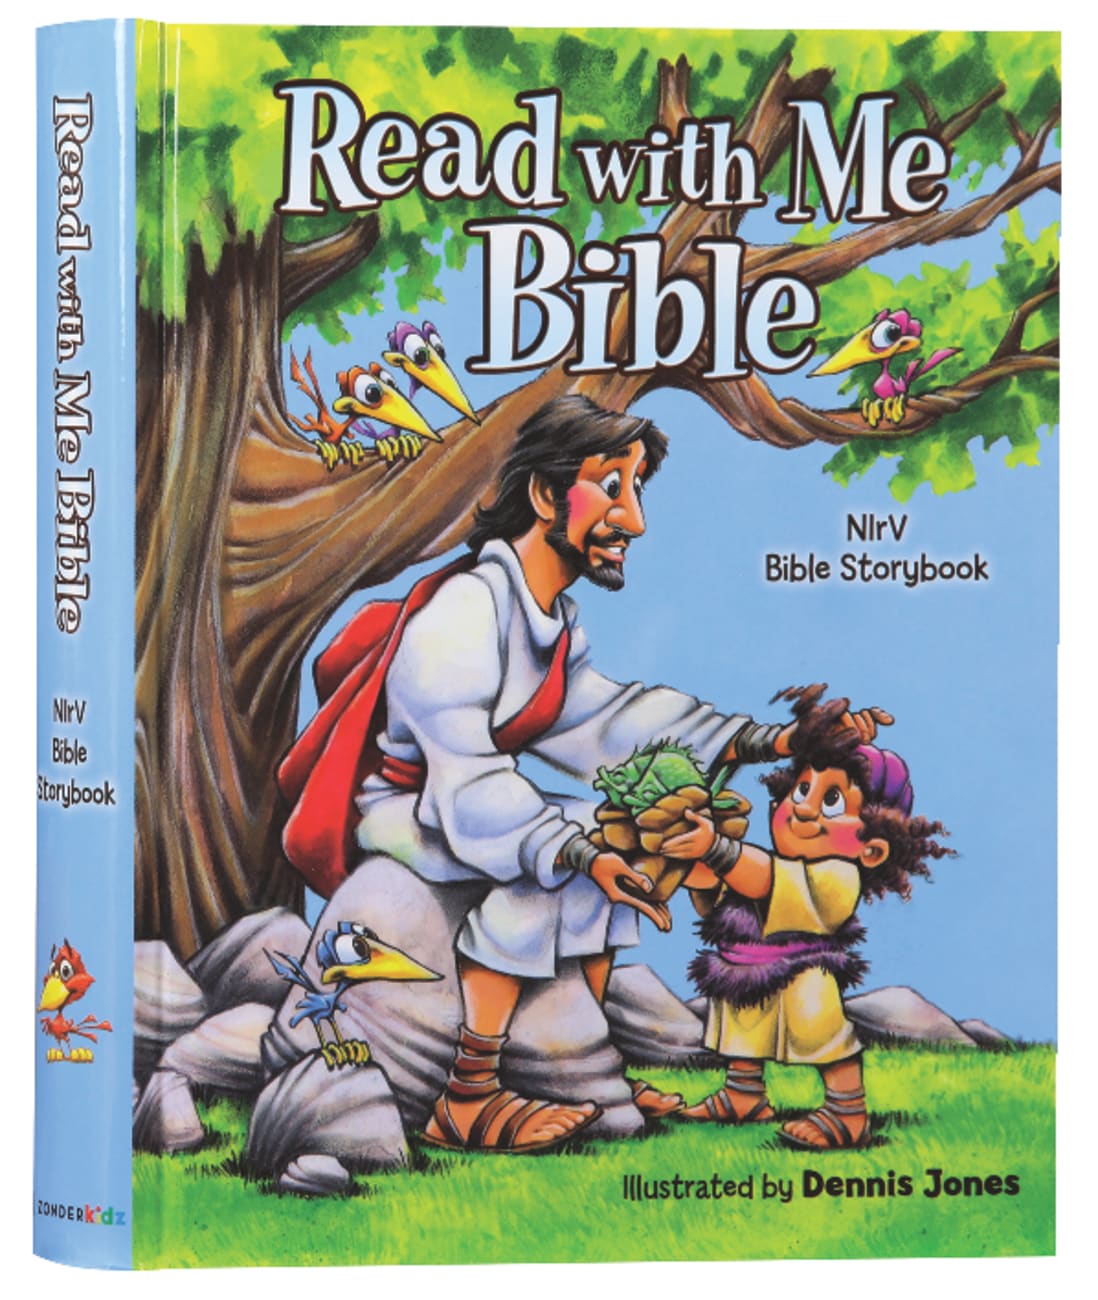 Read With Me Bible An NIRV Story Bible (2000) by Dennis Jones (Illus) |  Koorong